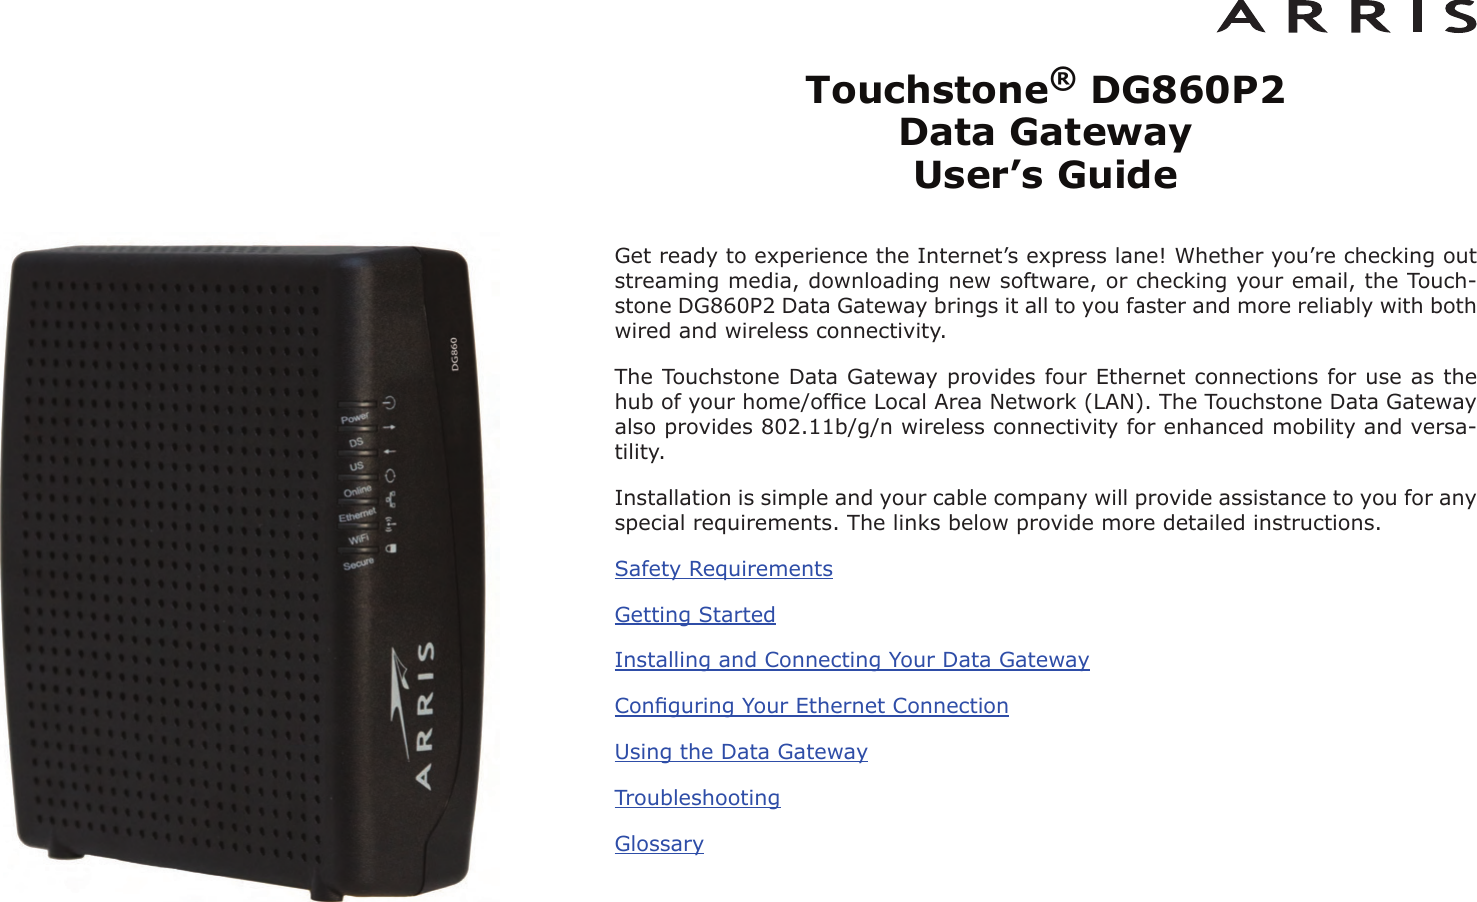 Touchstone®DG860P2 Data Gateway User’s GuideGet ready to experience the Internet’s express lane! Whether you’re checking outstreaming media, downloading new software, or checking your email, the Touch-stone DG860P2 Data Gateway brings it all to you faster and more reliably with bothwired and wireless connectivity.The Touchstone Data Gateway provides four Ethernet connections for use as thehub of your home/ofﬁce Local Area Network (LAN). The Touchstone Data Gatewayalso provides 802.11b/g/n wireless connectivity for enhanced mobility and versa-tility.Installation is simple and your cable company will provide assistance to you for anyspecial requirements. The links below provide more detailed instructions.Safety RequirementsGetting StartedInstalling and Connecting Your Data GatewayConﬁguring Your Ethernet ConnectionUsing the Data GatewayTroubleshootingGlossary